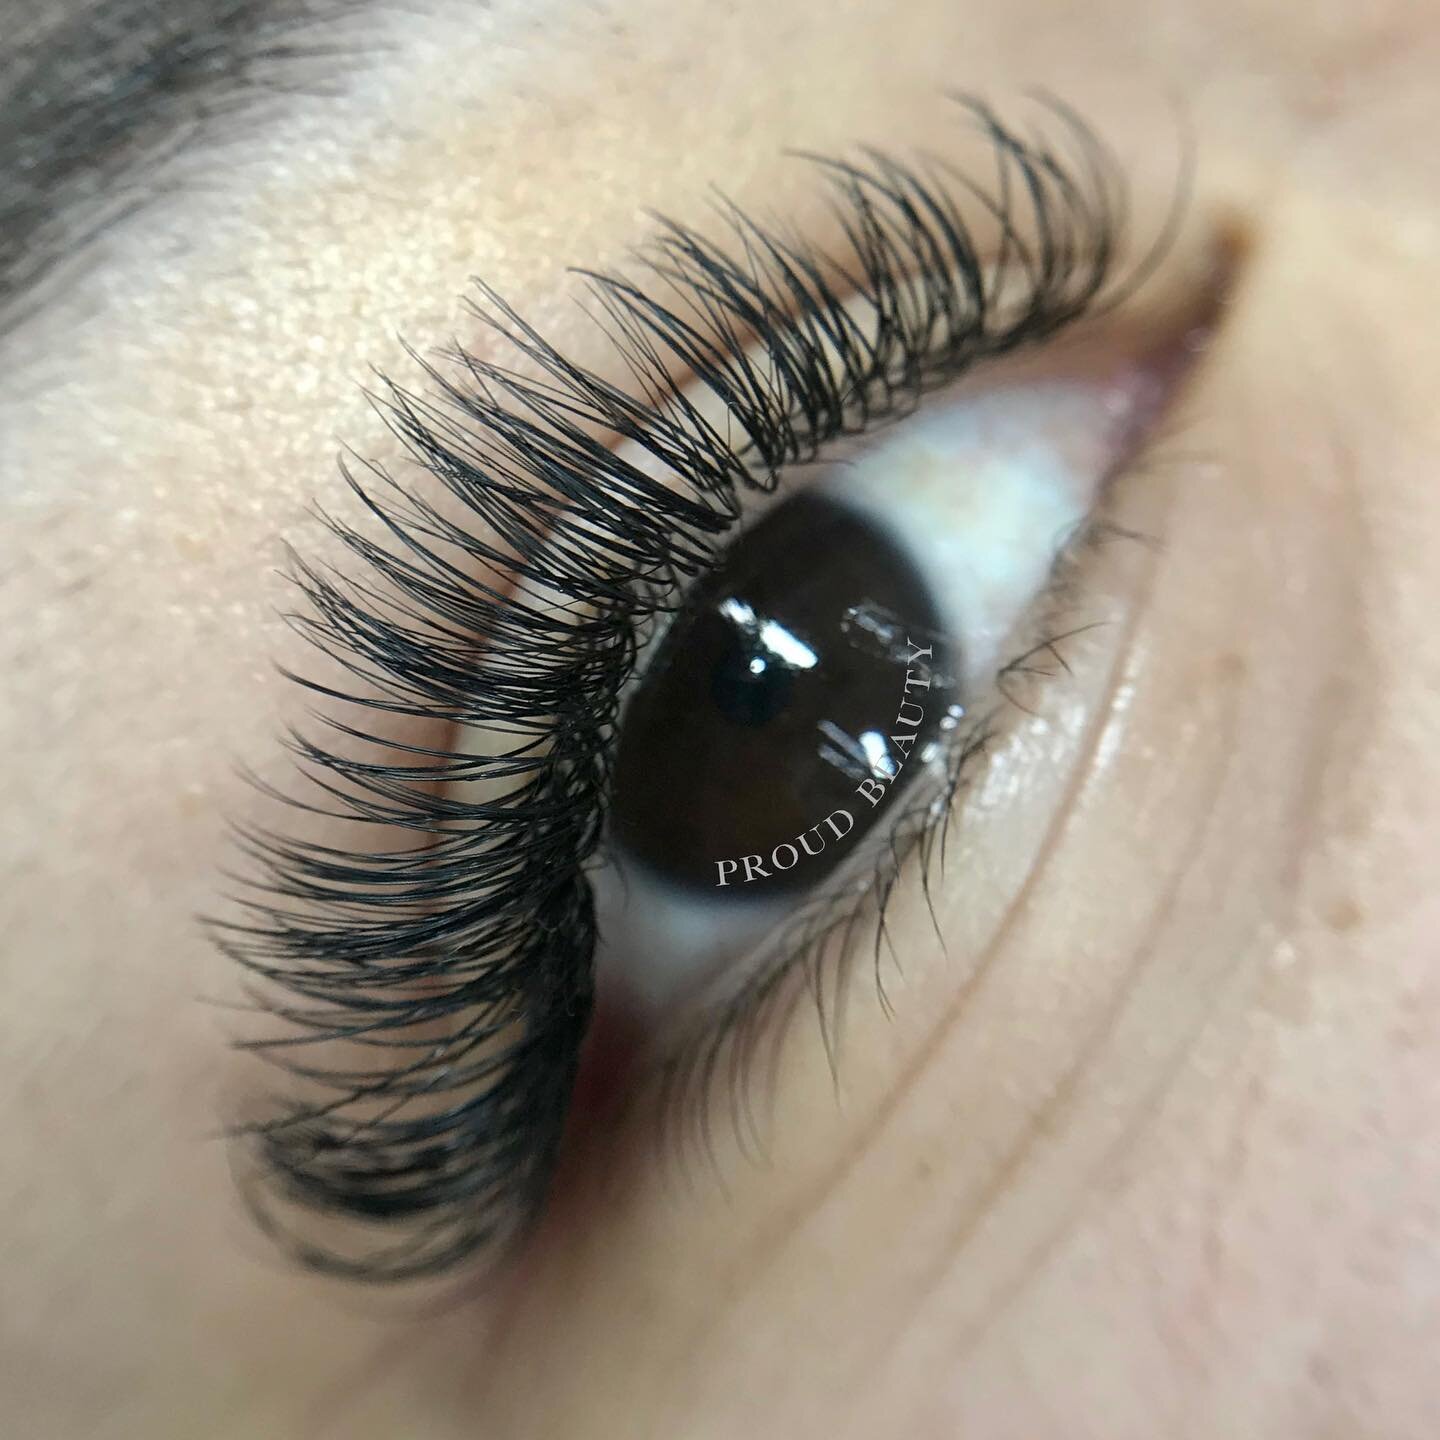 Open Eye Hybrid lash extensions on an amazing and hardworking nurse. Love being your chance to relax every few weeks and giving you lashes you love 💗